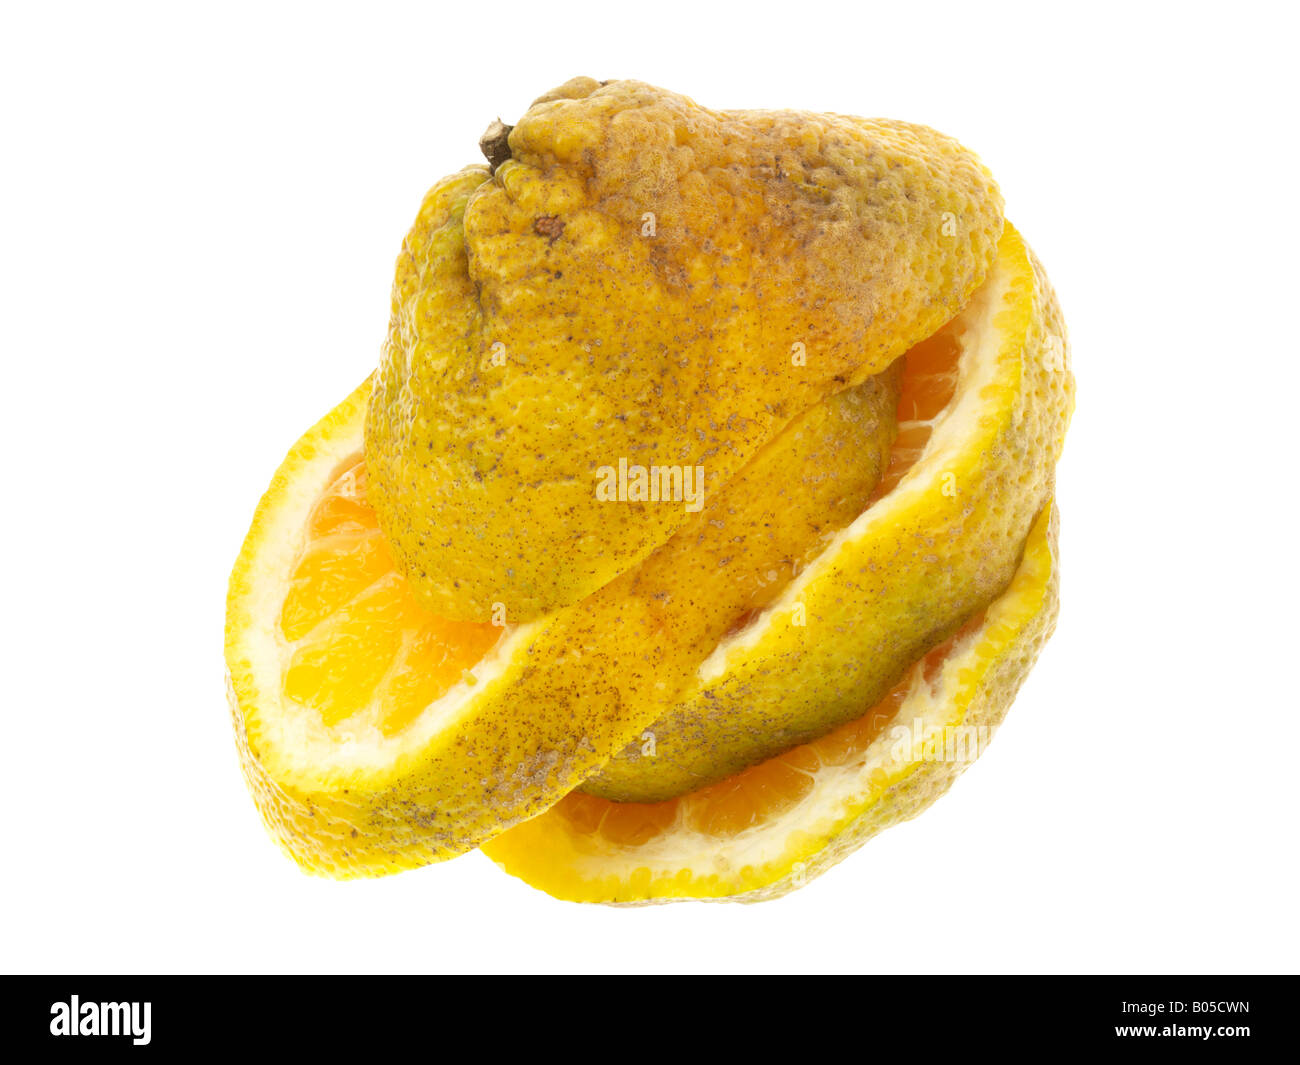 Fresh Whole Ripe Tropical Ugli Fruit Ready To Eat Isolated Against A White Background With A Clipping Path And No People Stock Photo